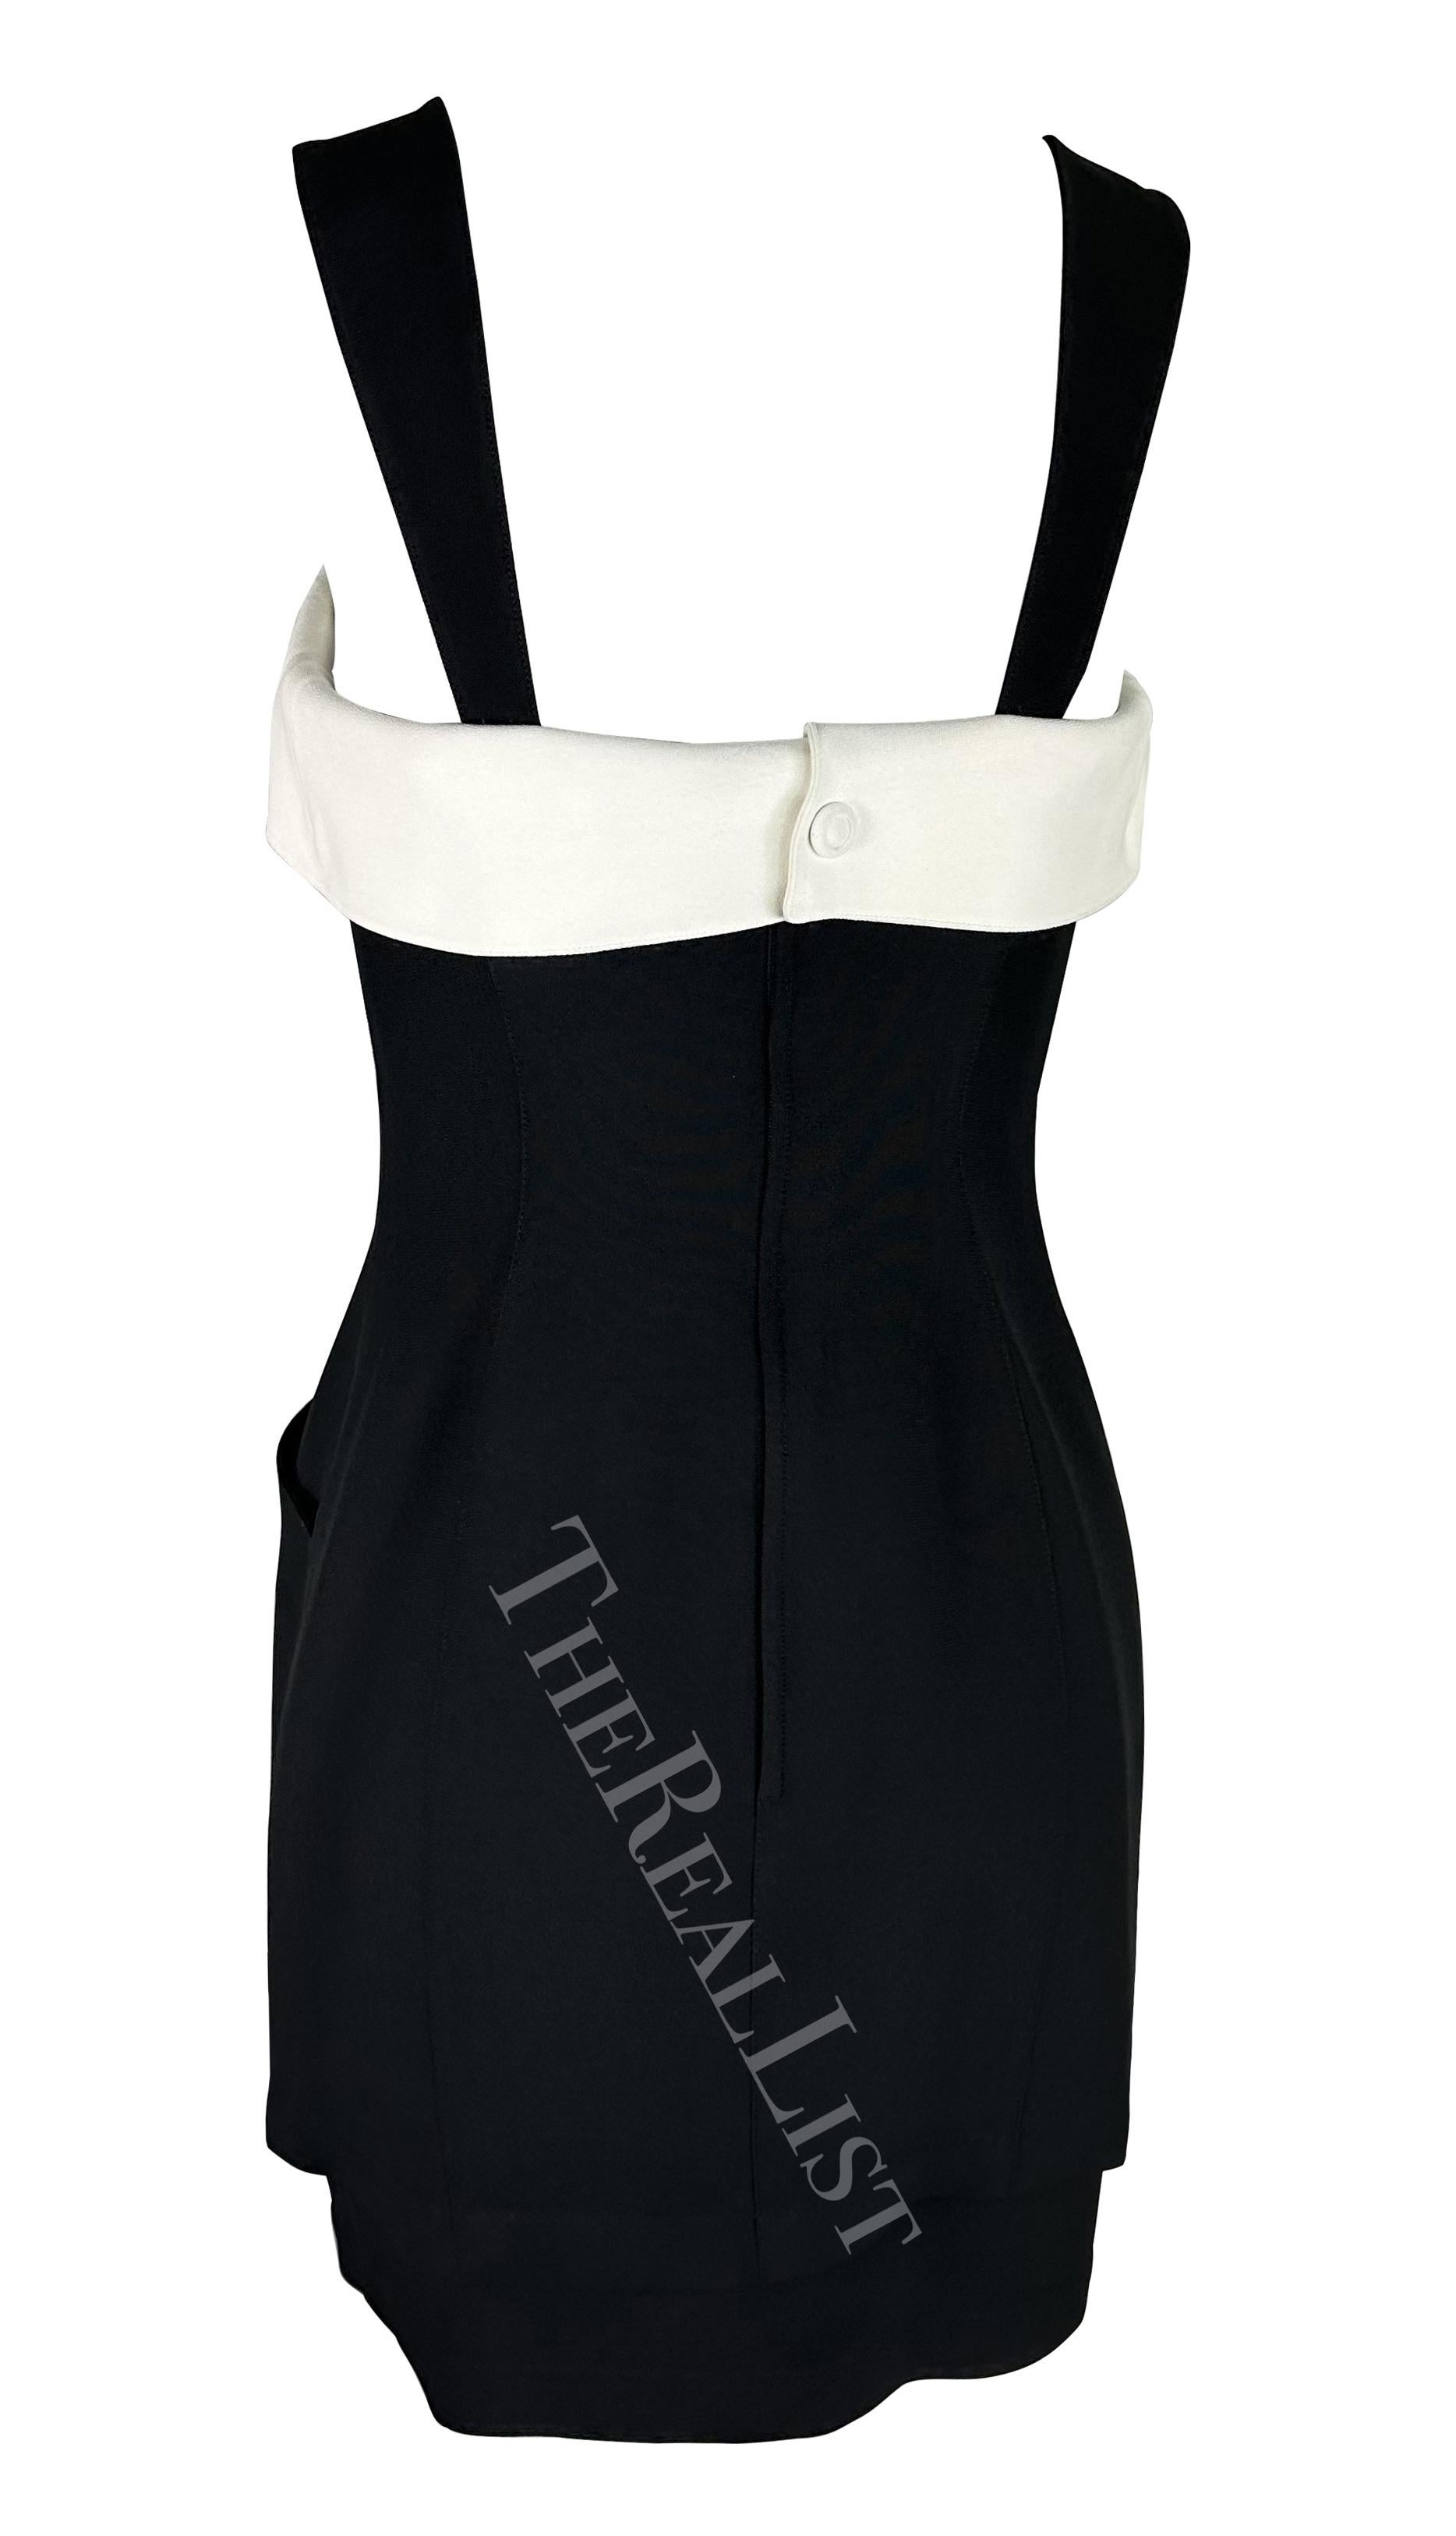 S/S 1996 Thierry Mugler Runway Black White Trim Cinched Mini Dress For Sale 3